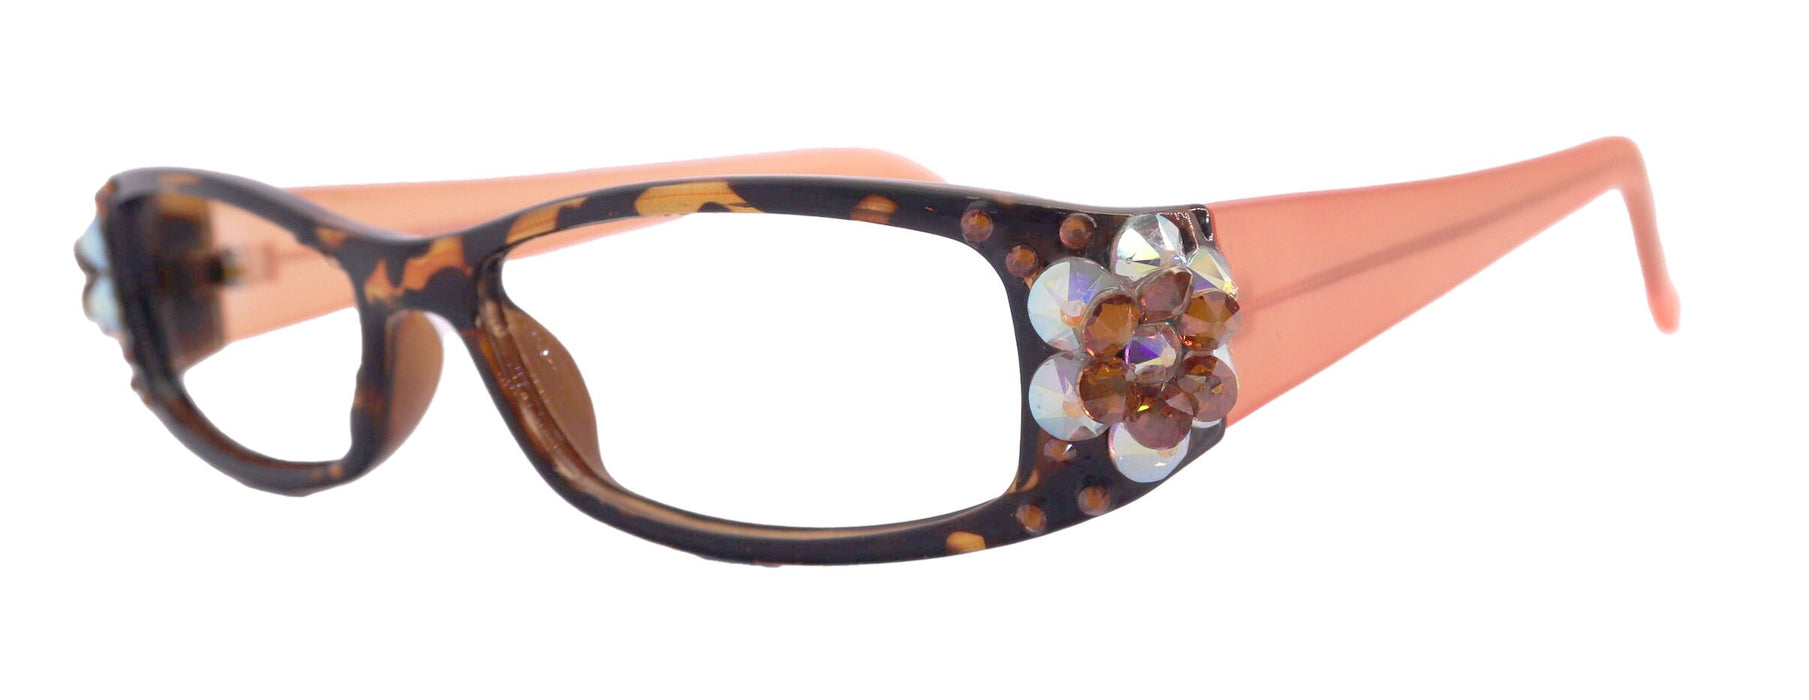 All Favorite, (Bling) Women Reading Glasses Adorned W European Crystals (Tortoise Brown) Frame +4 +4.5 +5 +6 NY Fifth Avenue.